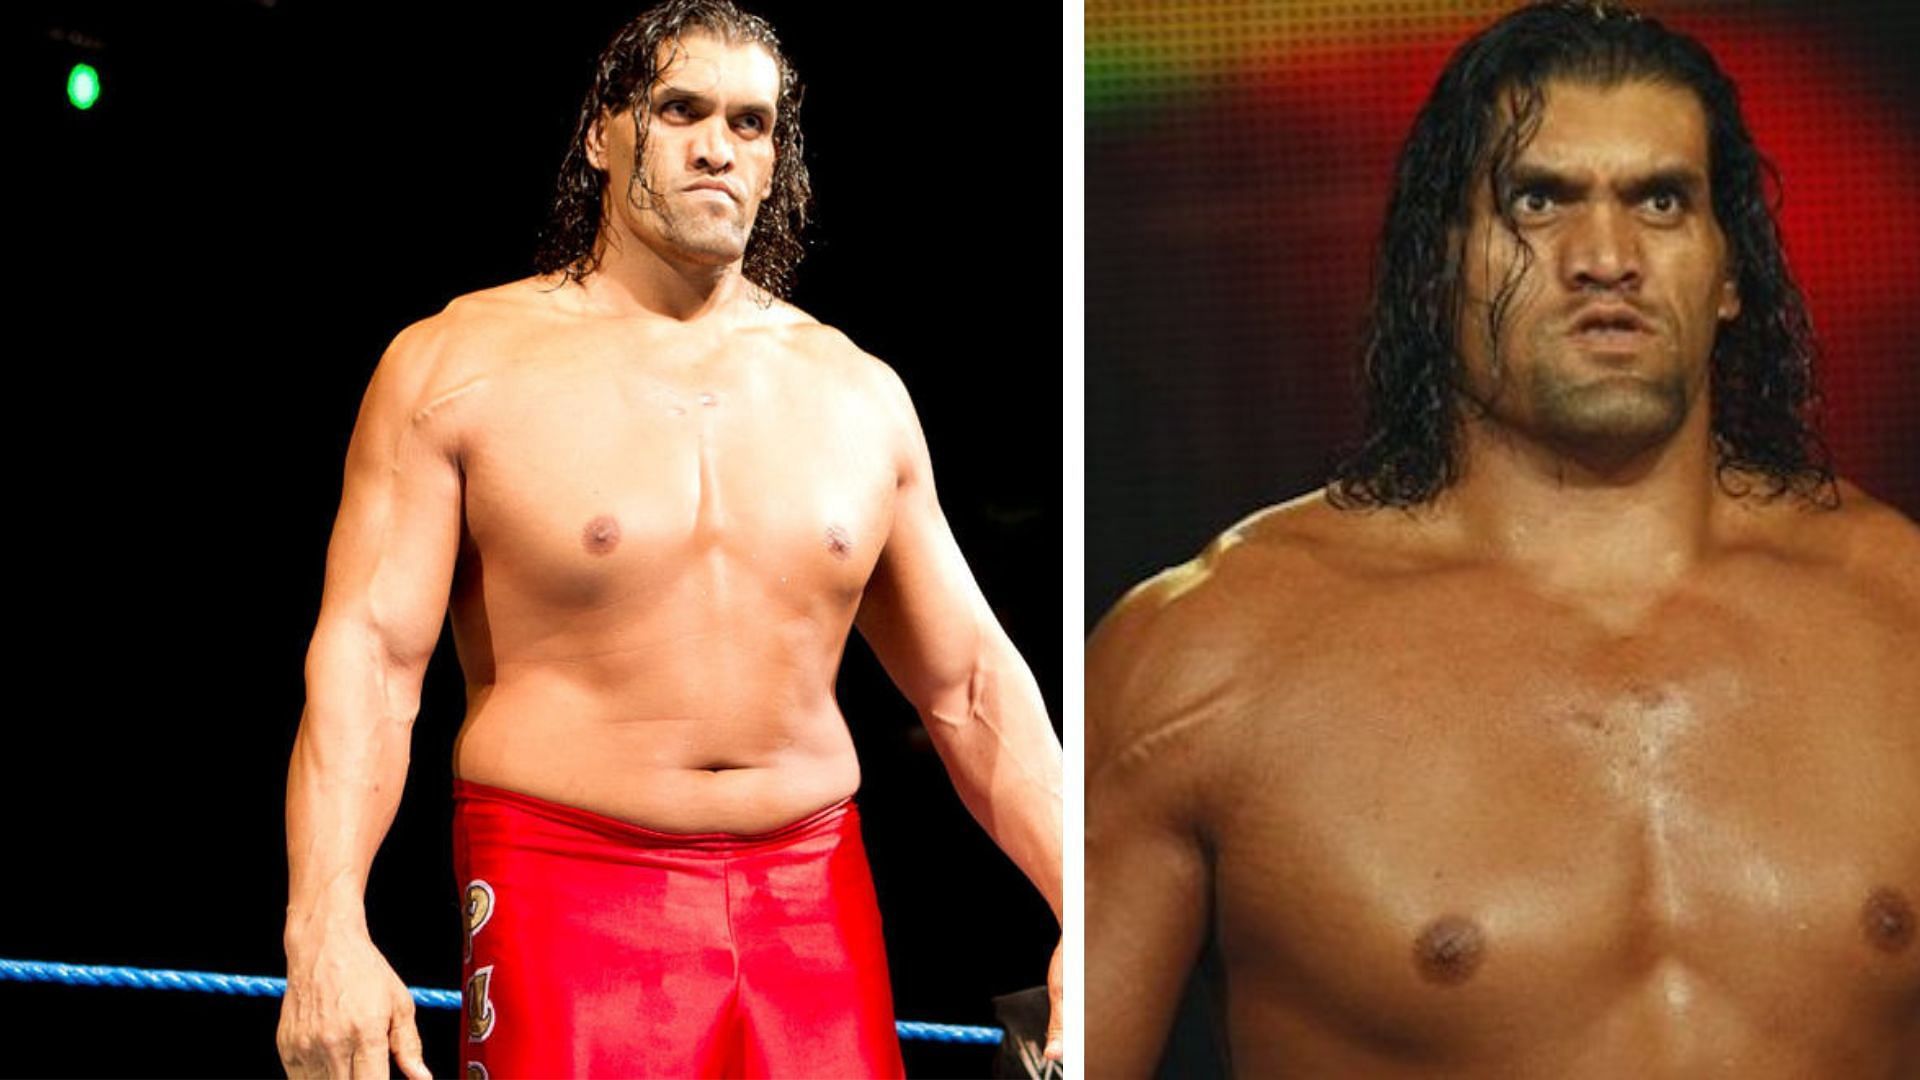 The Great Khali is a WWE Hall of Famer